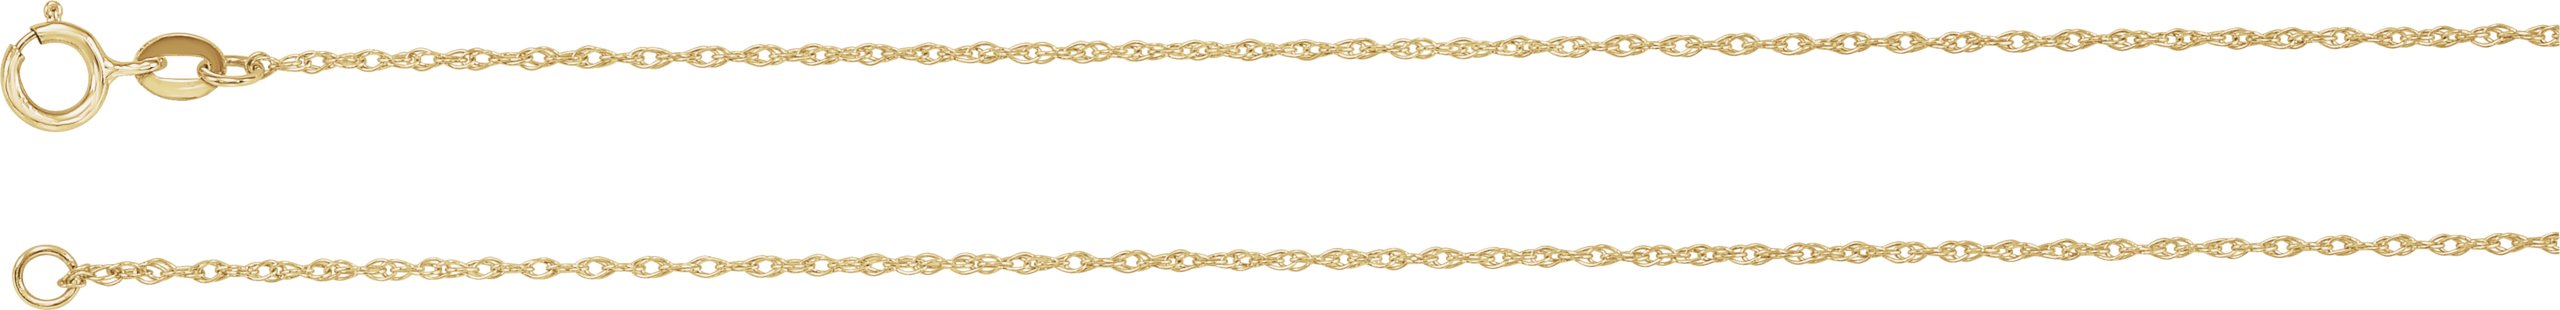 14K Yellow 1 mm Solid Rope 24 inch Chain Ref. 144646